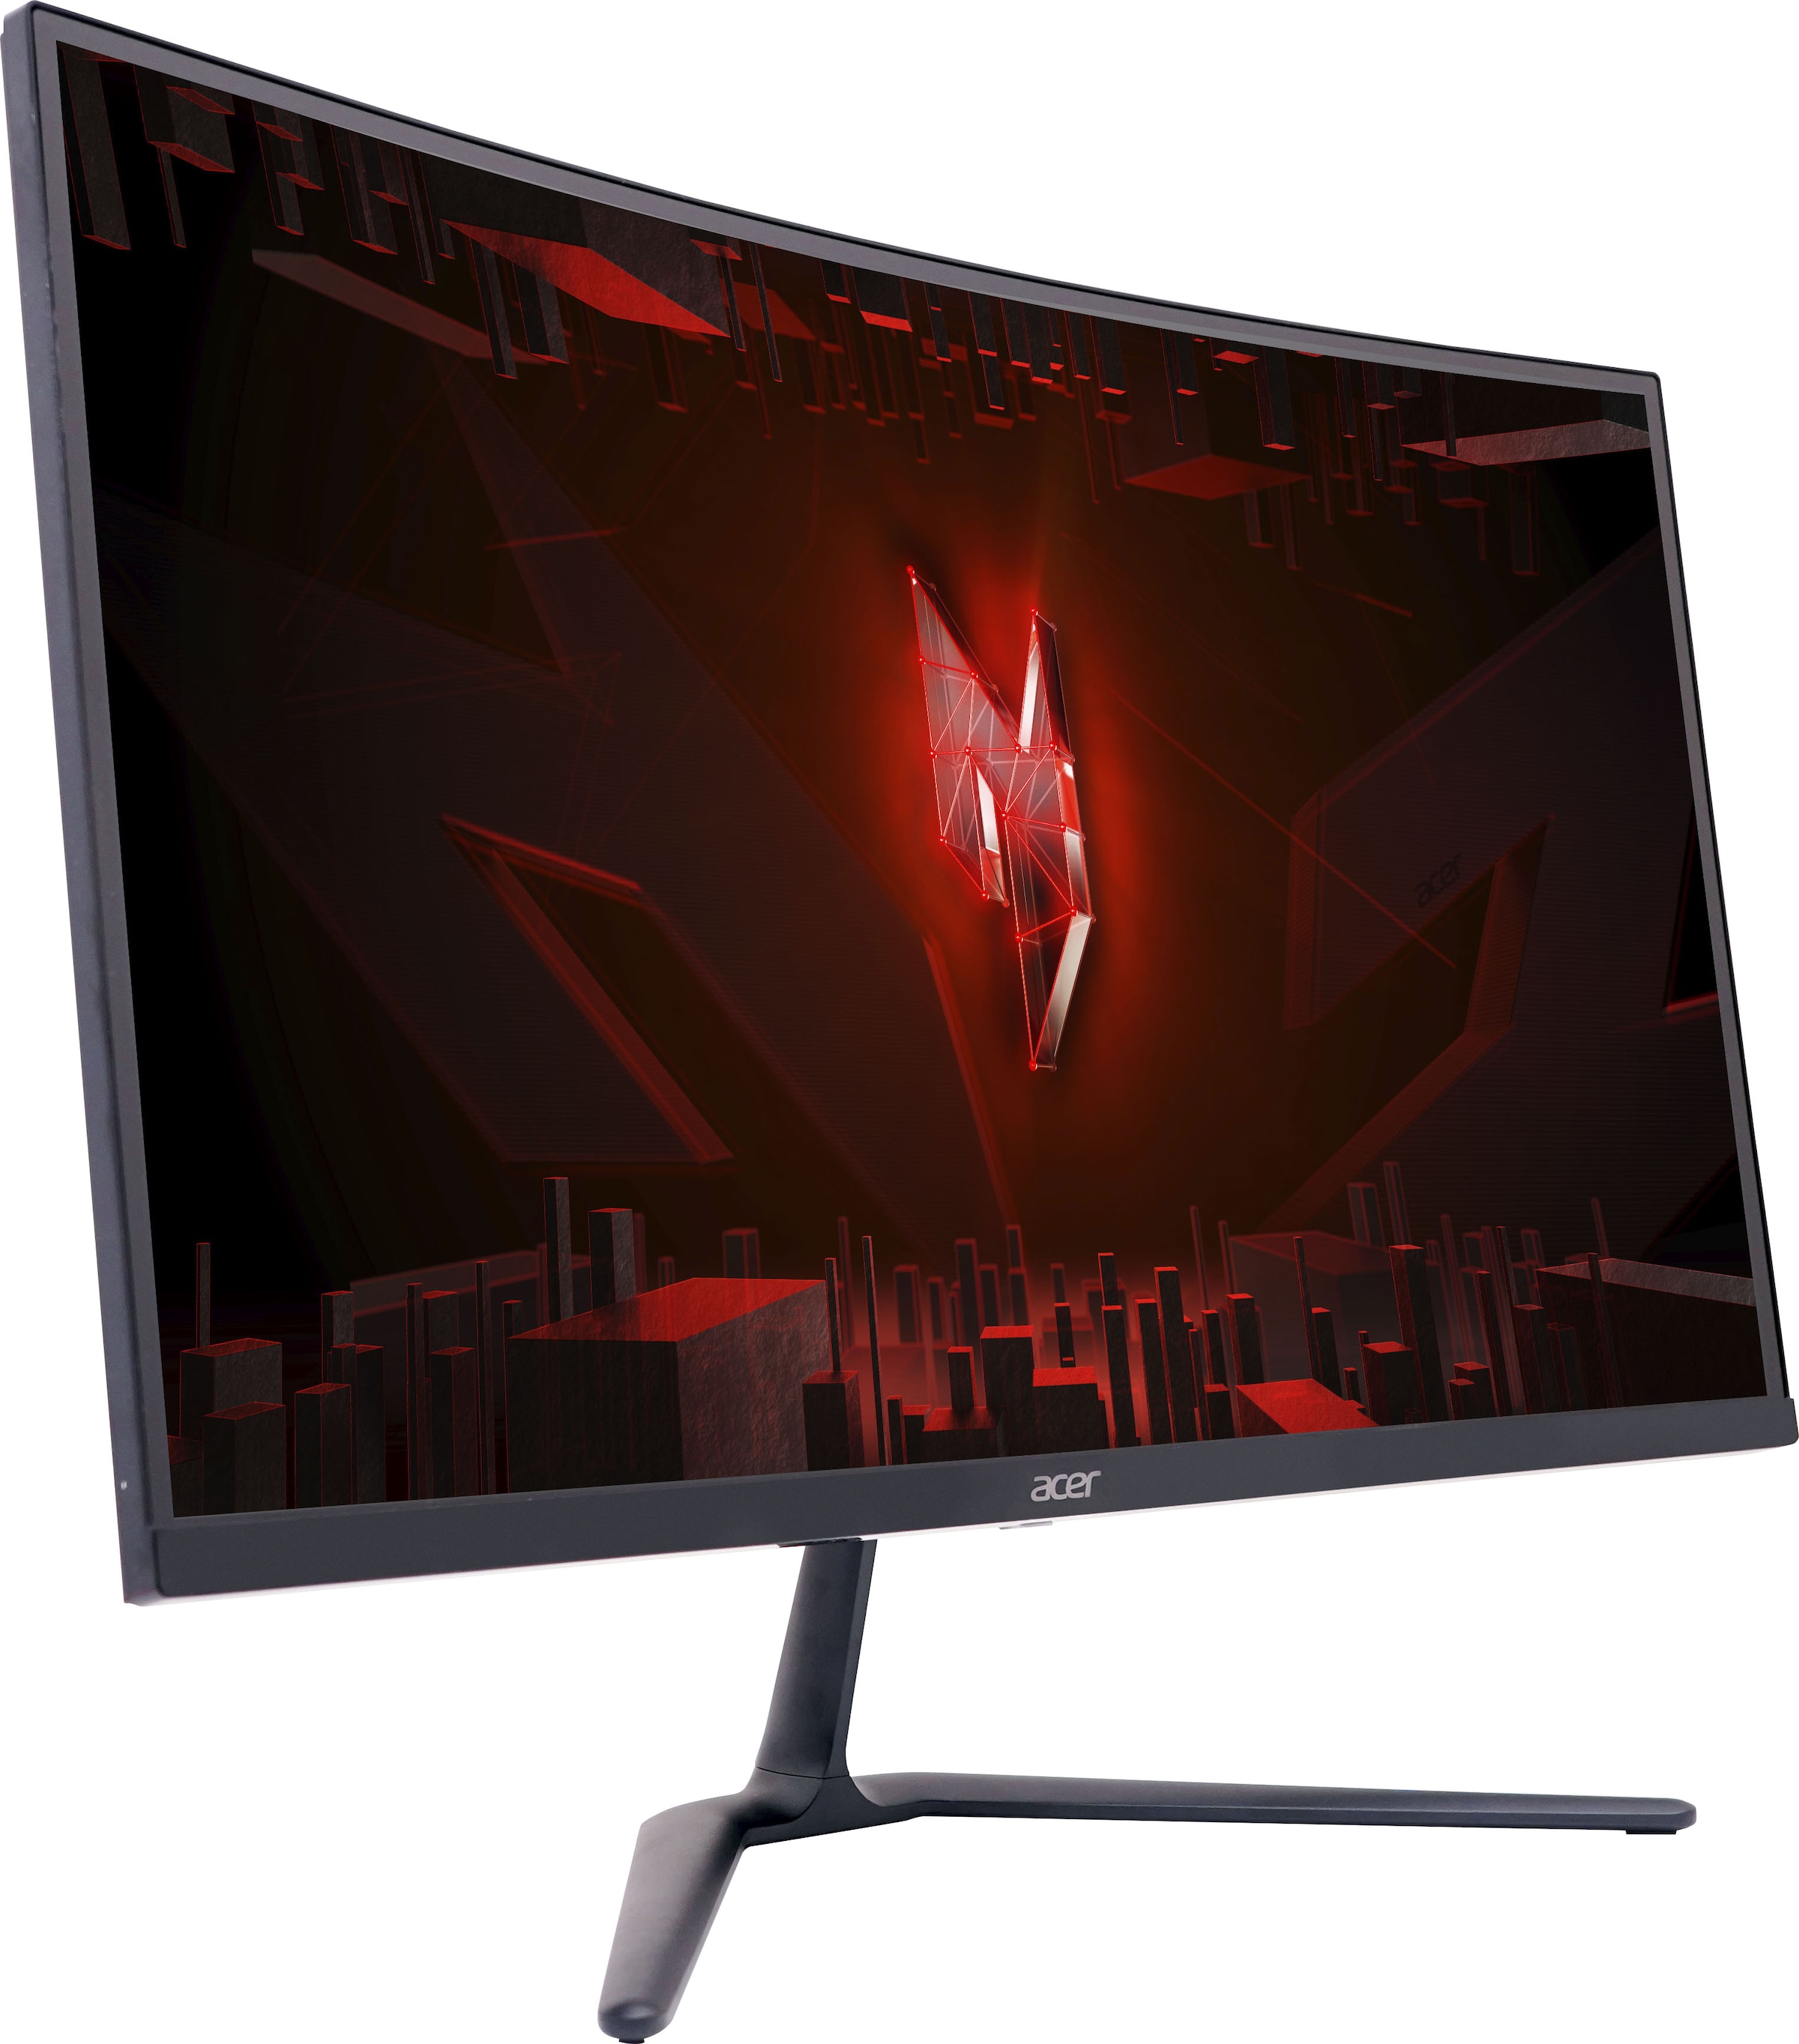 »Nitro 1 Hz Zoll, ms Reaktionszeit, ED270R«, online HD, 68,6 jetzt px, 1920 Curved-Gaming-LED-Monitor cm/27 Full Acer 165 OTTO x 1080 bei